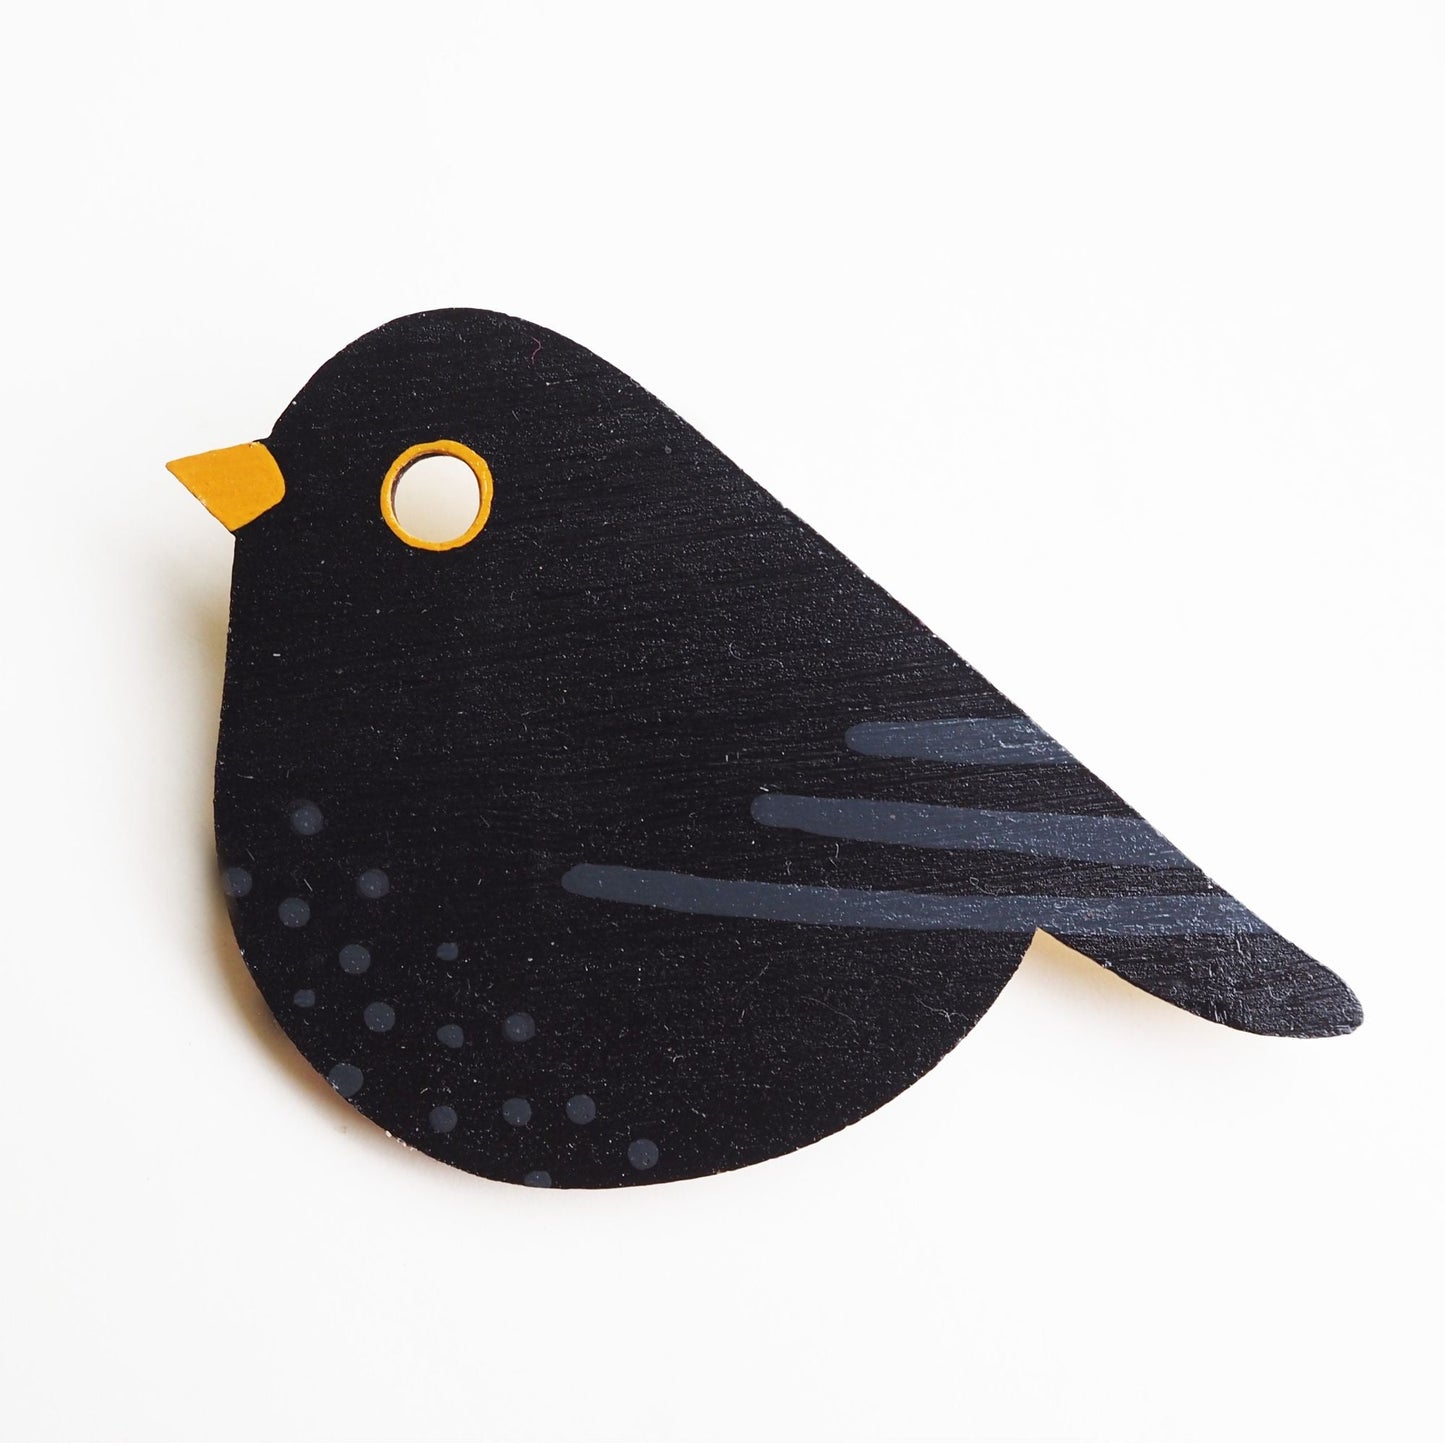 Load image into Gallery viewer, Painted blackbird brooch against a white background.
